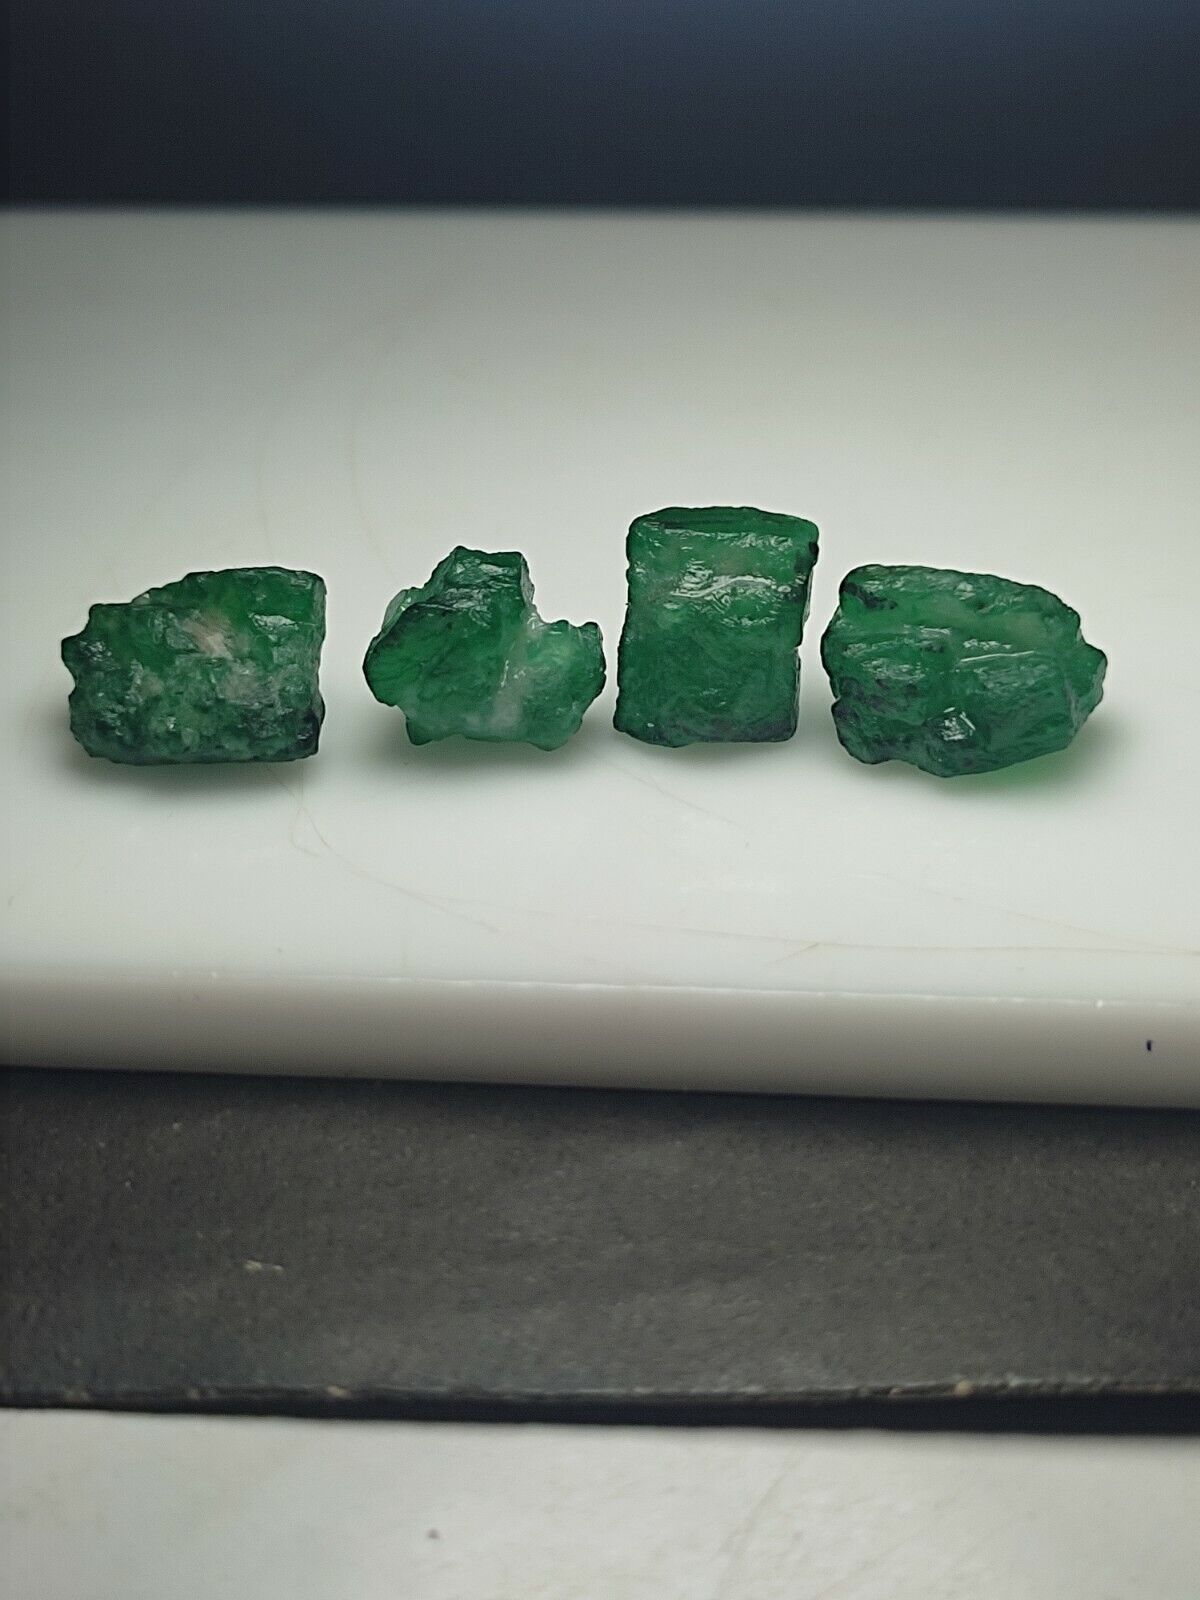 6gram Emerald crystals Rough shinning  collection peice from swat Pakistan